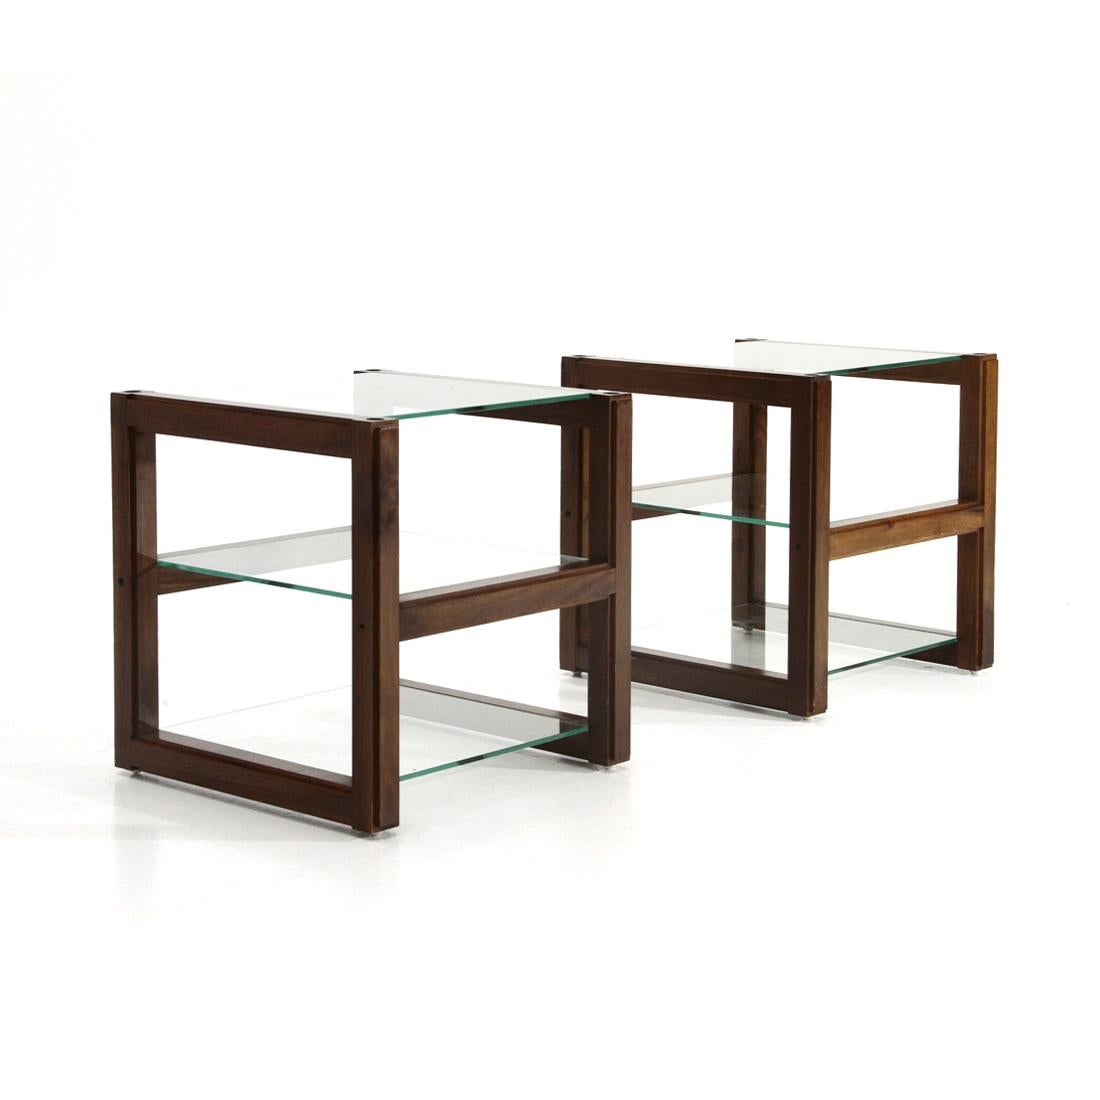 Pair of Italian-made bedside tables produced in the 1960s.
Wooden structure.
3 glass shelves.
Plastic feet.
The bedside tables can be stacked to become a small bookcase.
Good general condition, some signs due to normal use over